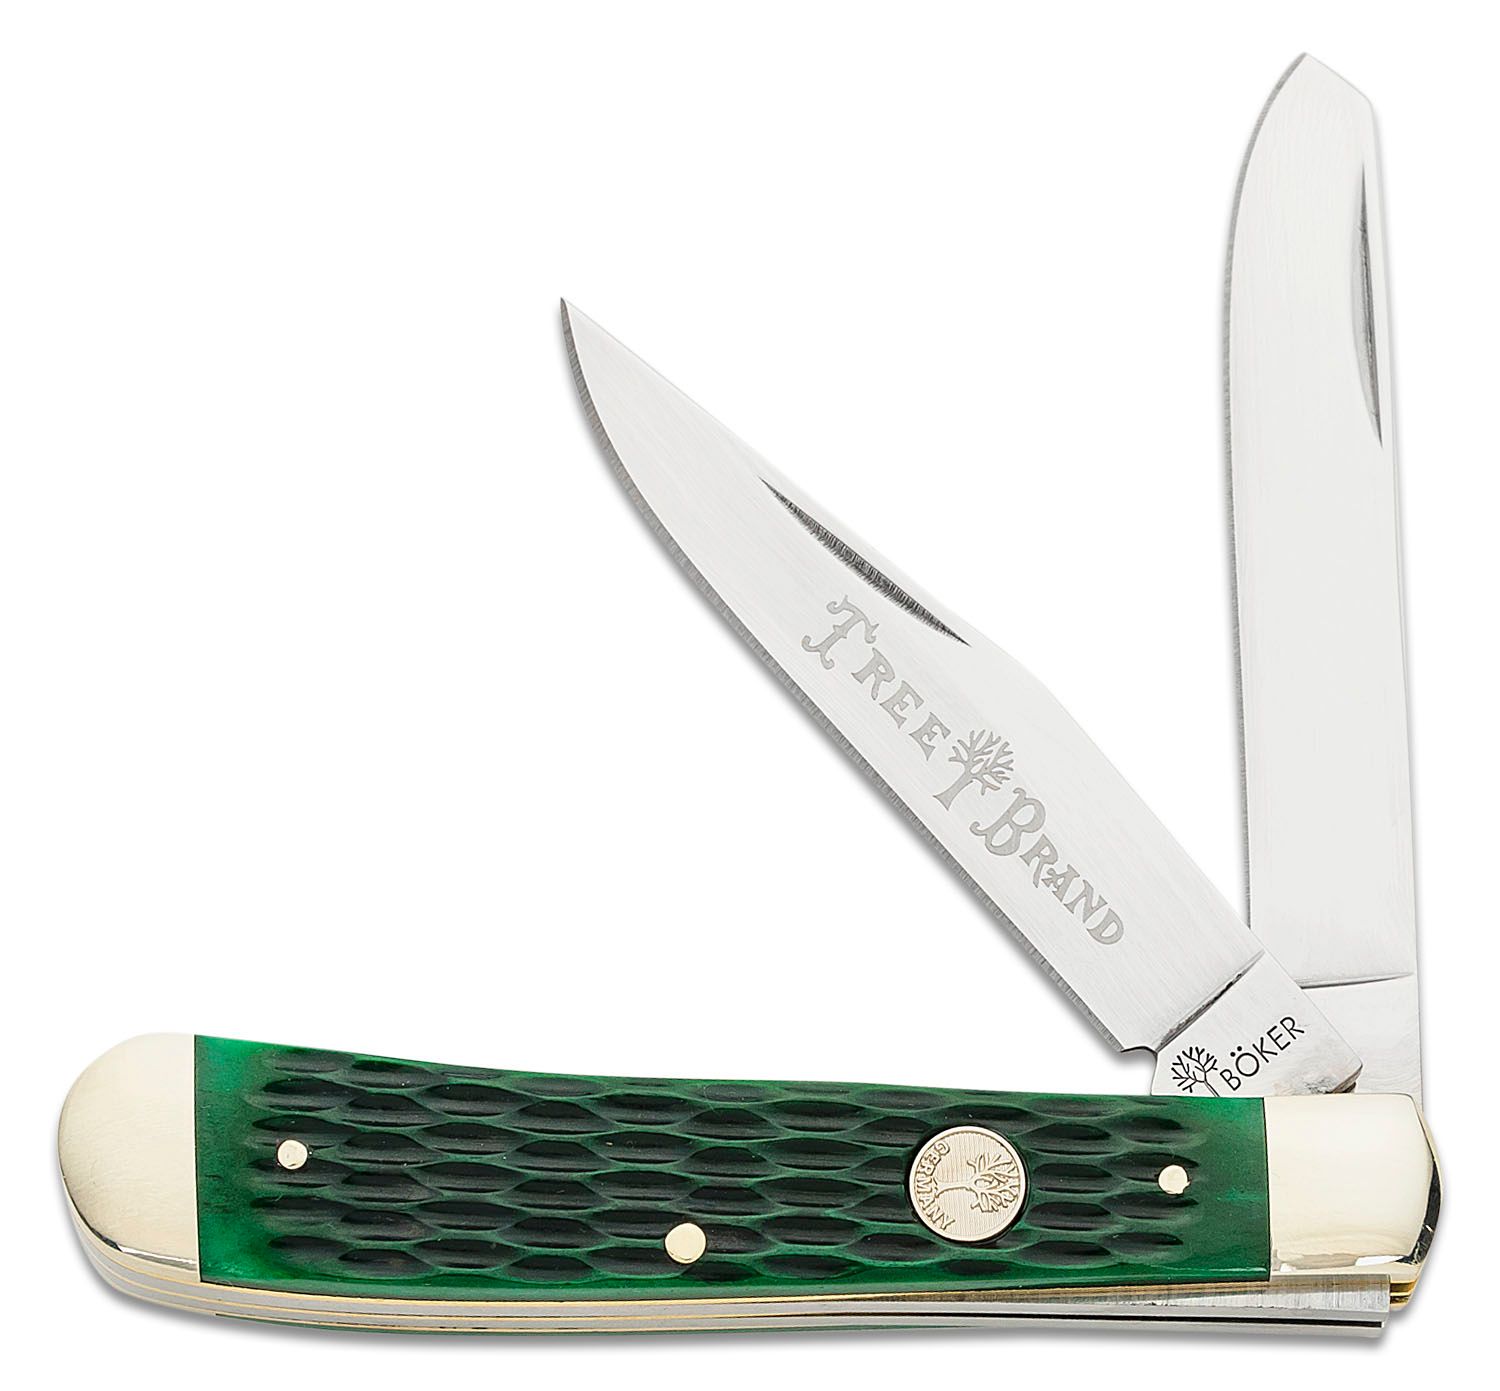 Boker Traditional Series 2.0 Trapper, Jigged Green Bone Handles with Nickel  Silver Bolsters, D2 Blade 4.25 Closed - KnifeCenter - 110831